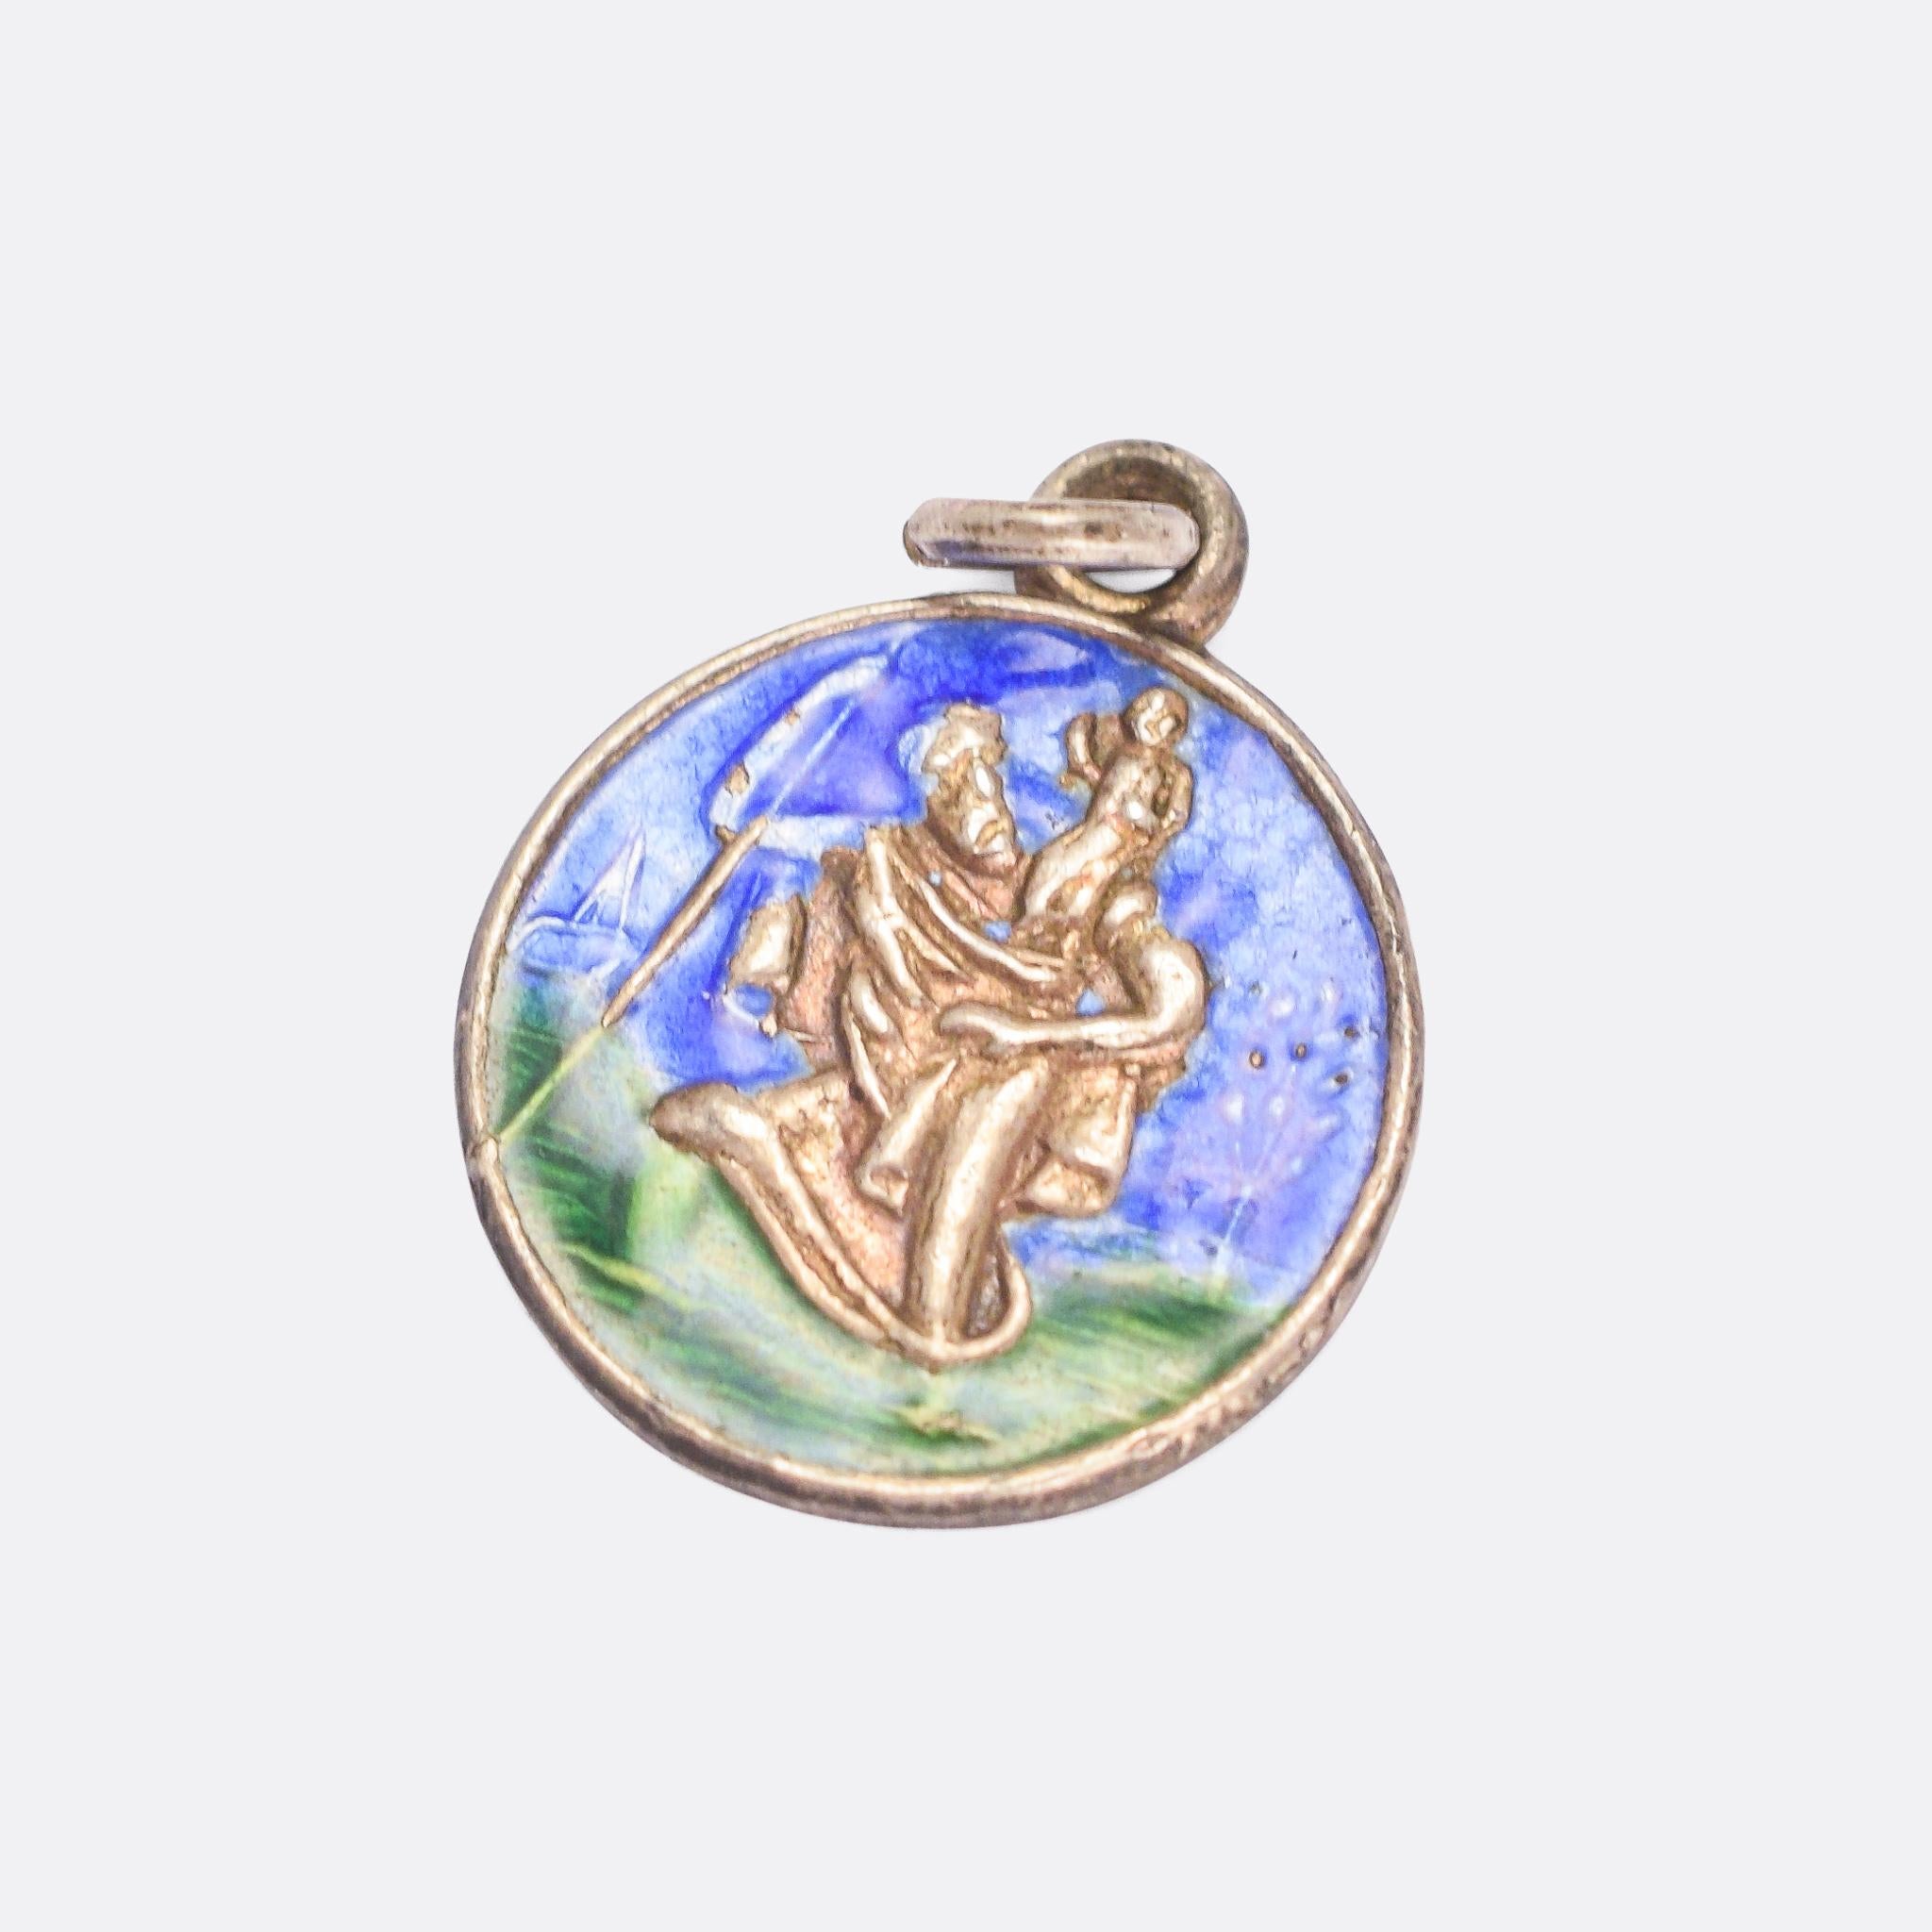 A sweet vintage St. Christopher charm modelled in sterling silver and finished in bright blue and green enamel. With clear English hallmarks from 1964.

MEASUREMENTS 
1.7 x 1.4cm

WEIGHT 
1.6g

MARKS 
English hallmarks for Sterling Silver,